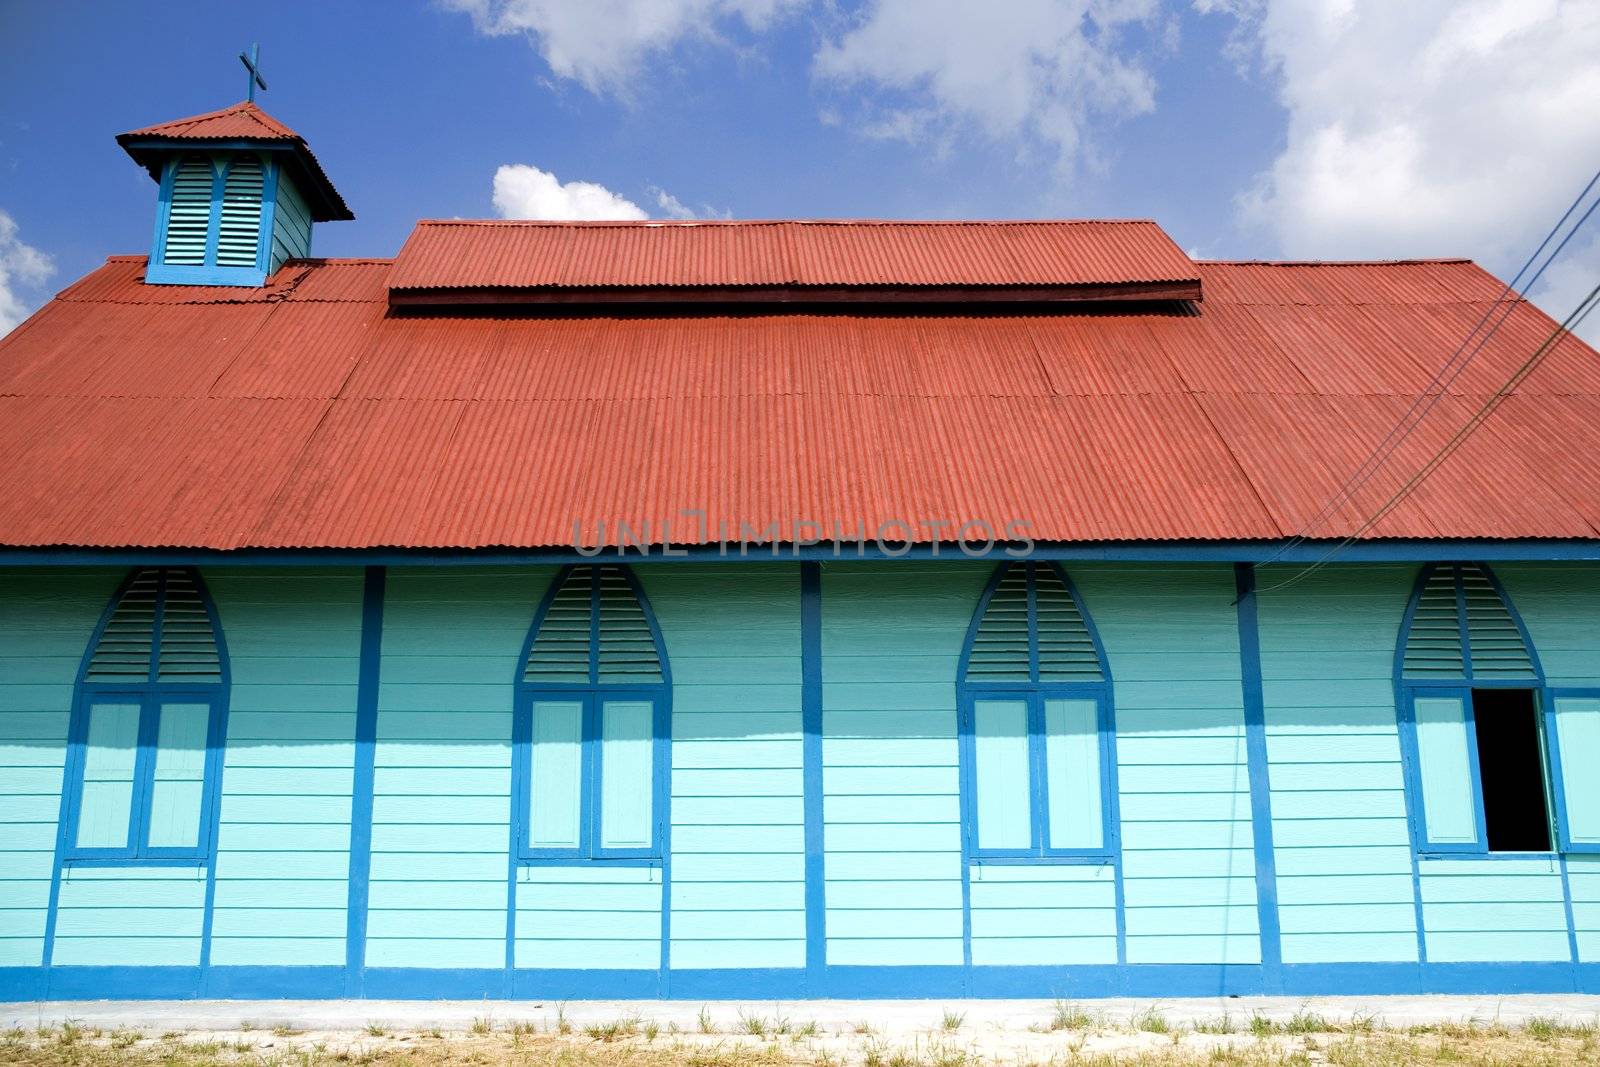 Image of an old wooden village chapel in Malaysia.